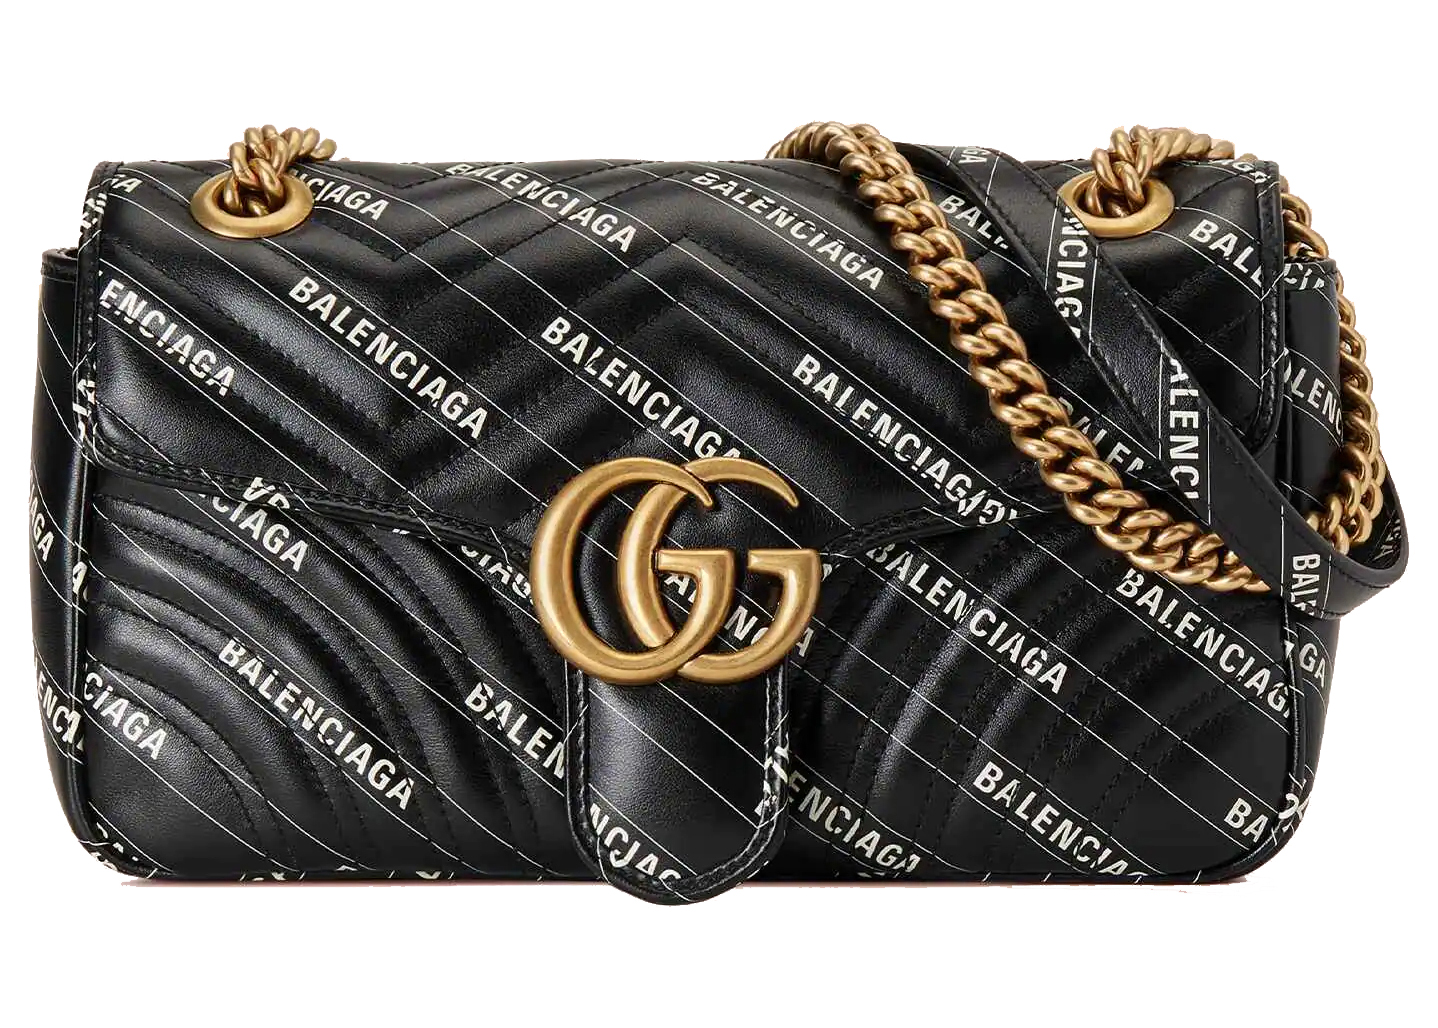 Gucci x Balenciaga The Hacker Project Small GG Marmont Bag Black in Leather  with Gold-tone